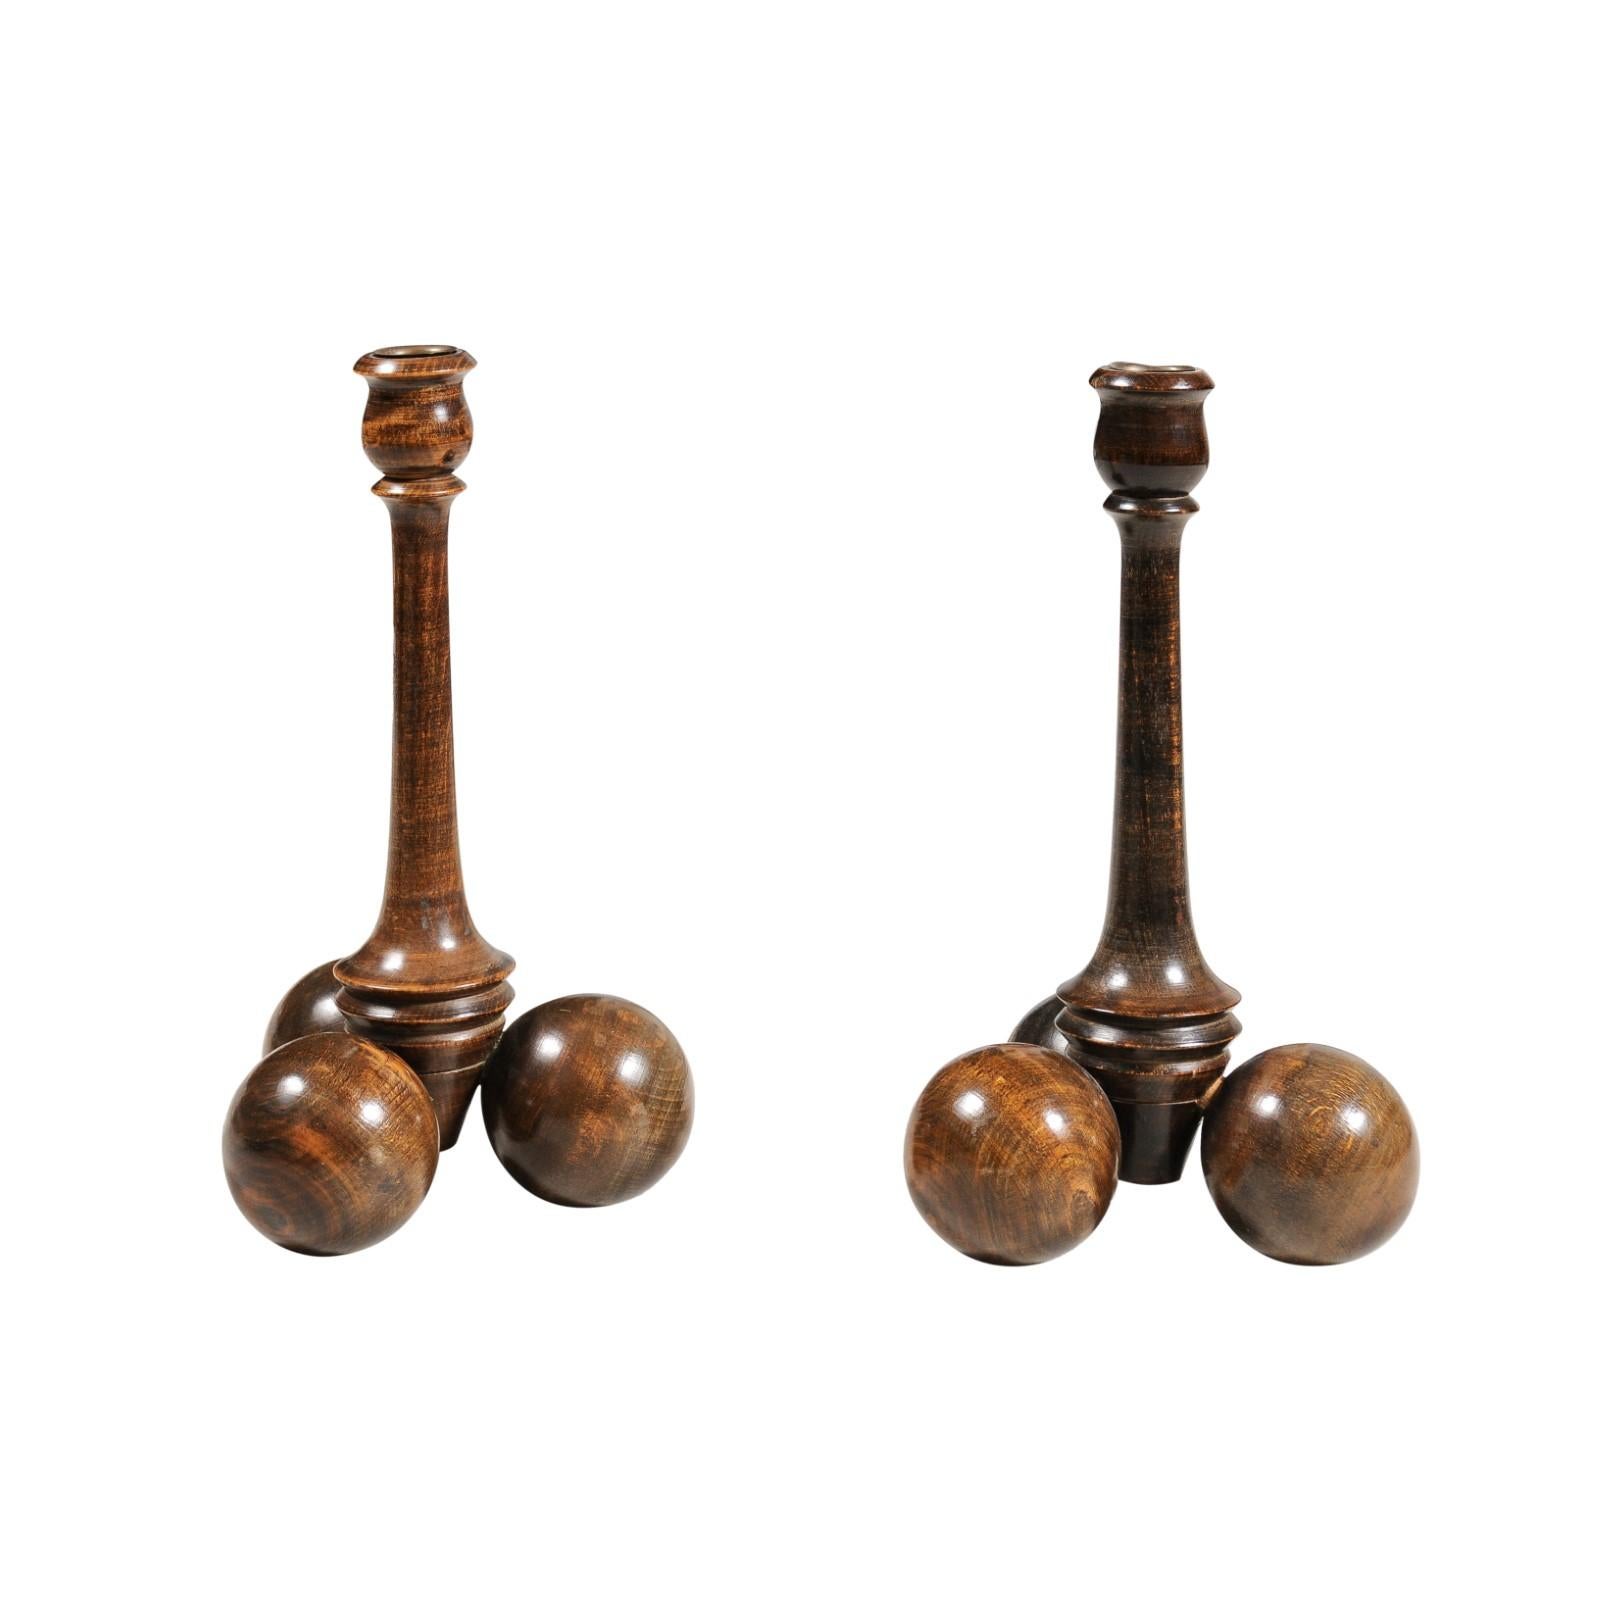 A pair of Victorian period wooden candlesticks from the late 19th century, with tubular shaped bobèches and tripartite spherical bases. Created in England during the later years of Queen Victoria's reign in the 19th century, each of this whimsical